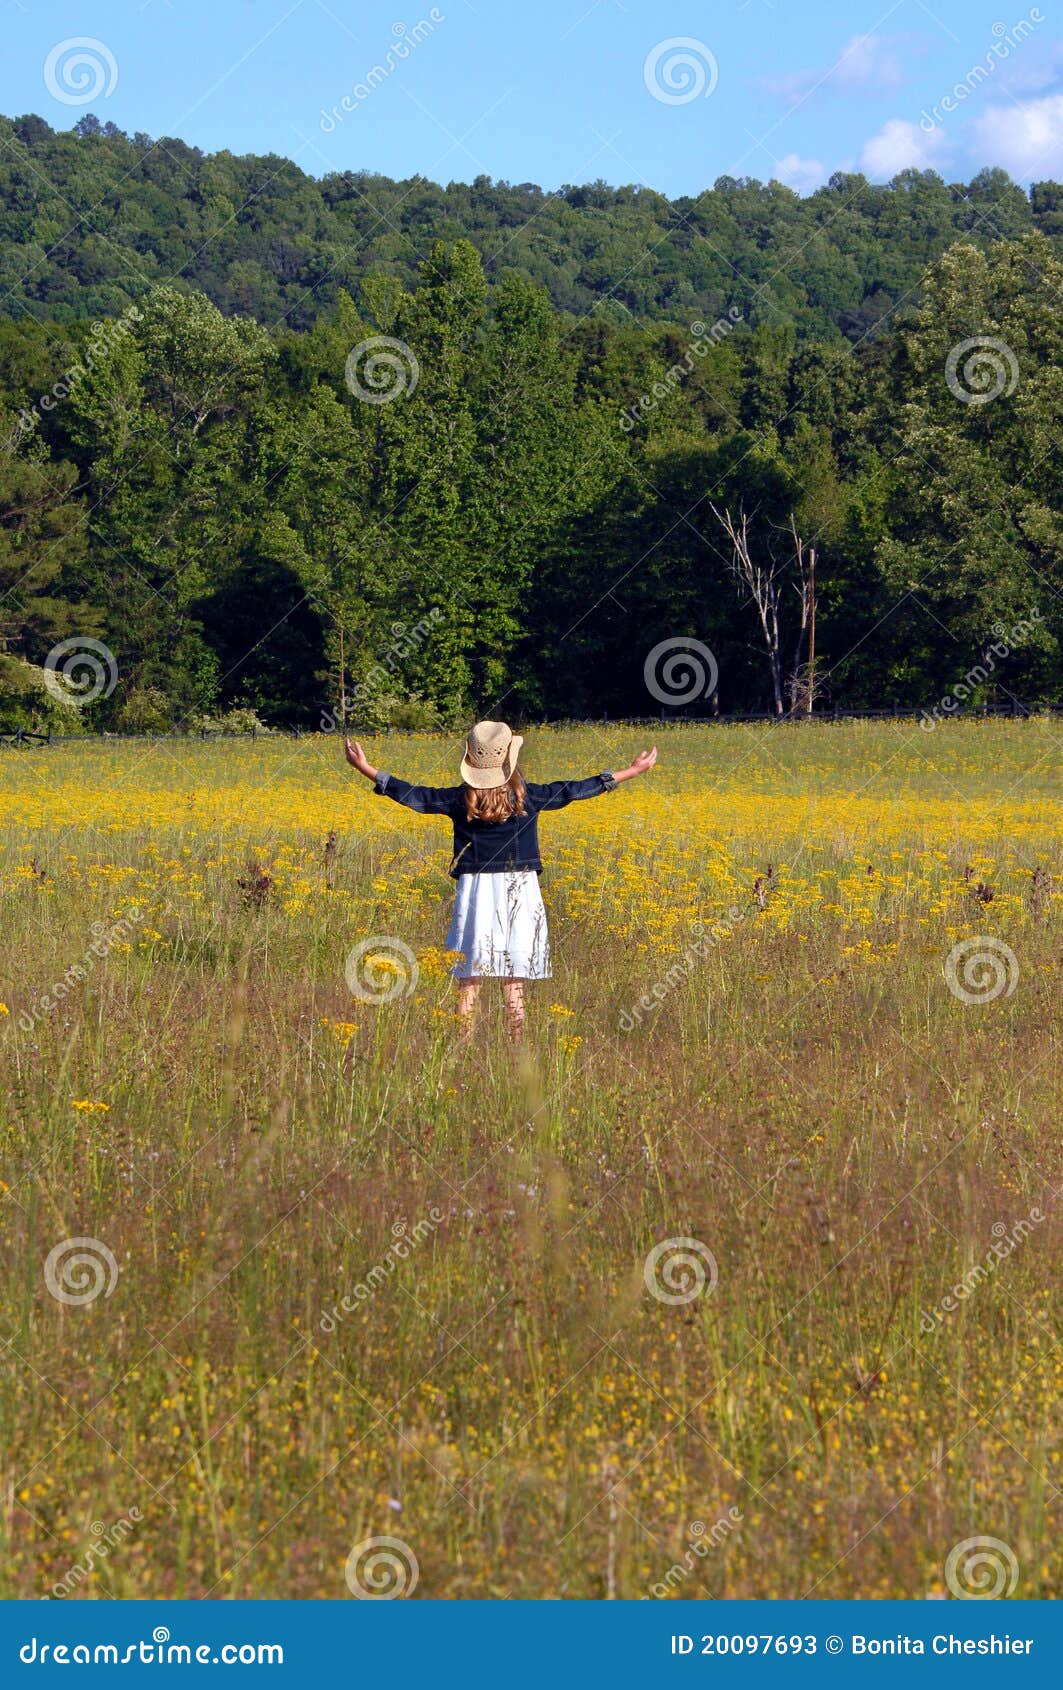 Embracing Nature stock image. Image of meadow, cowboy - 20097693